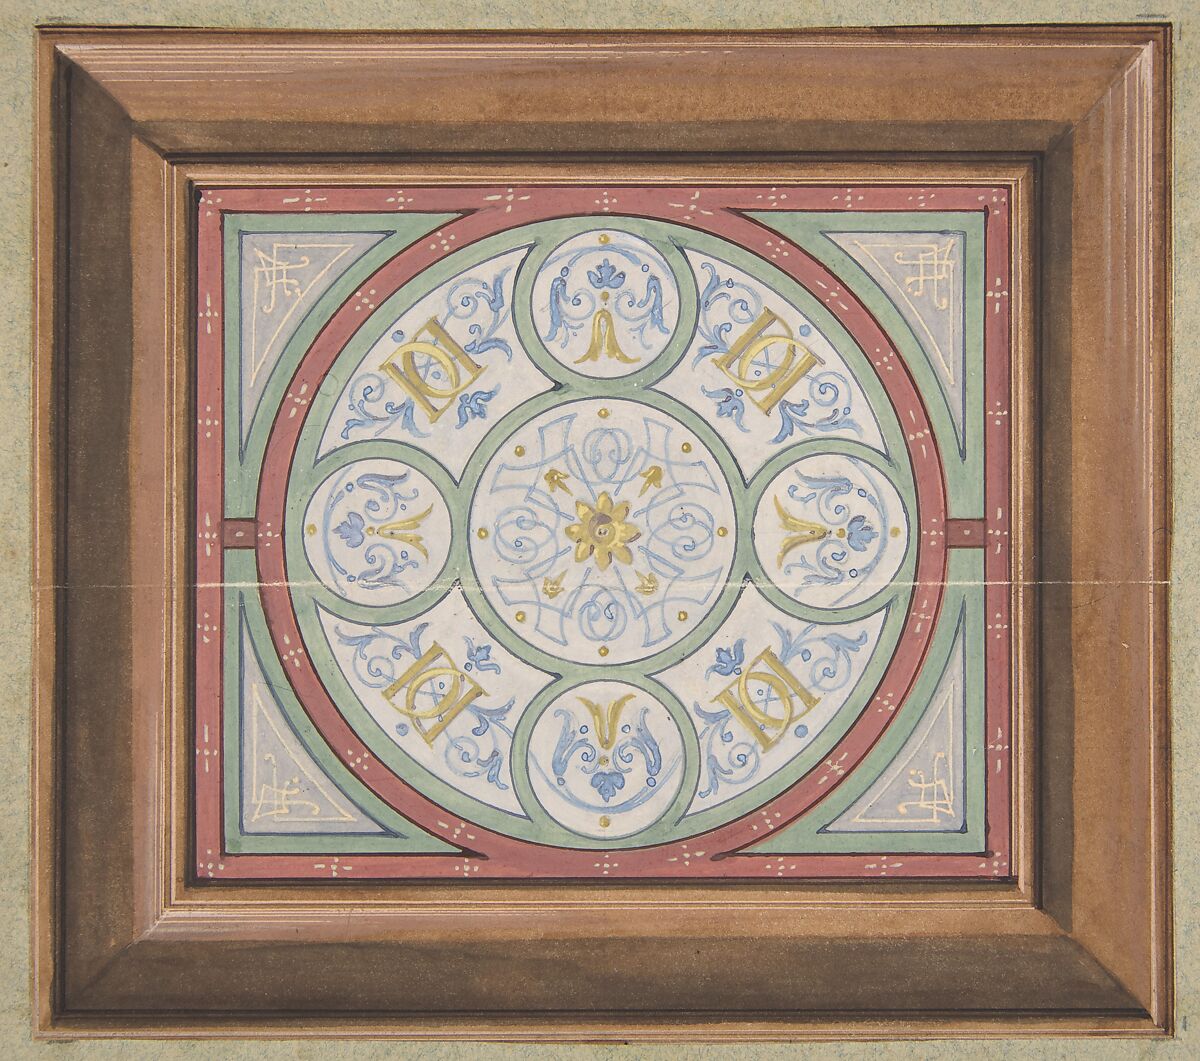 Design for painted decoration of a ceiling incorporating interwined initials: DD, Jules-Edmond-Charles Lachaise (French, died 1897), pen and ink, watercolor on wove paper 